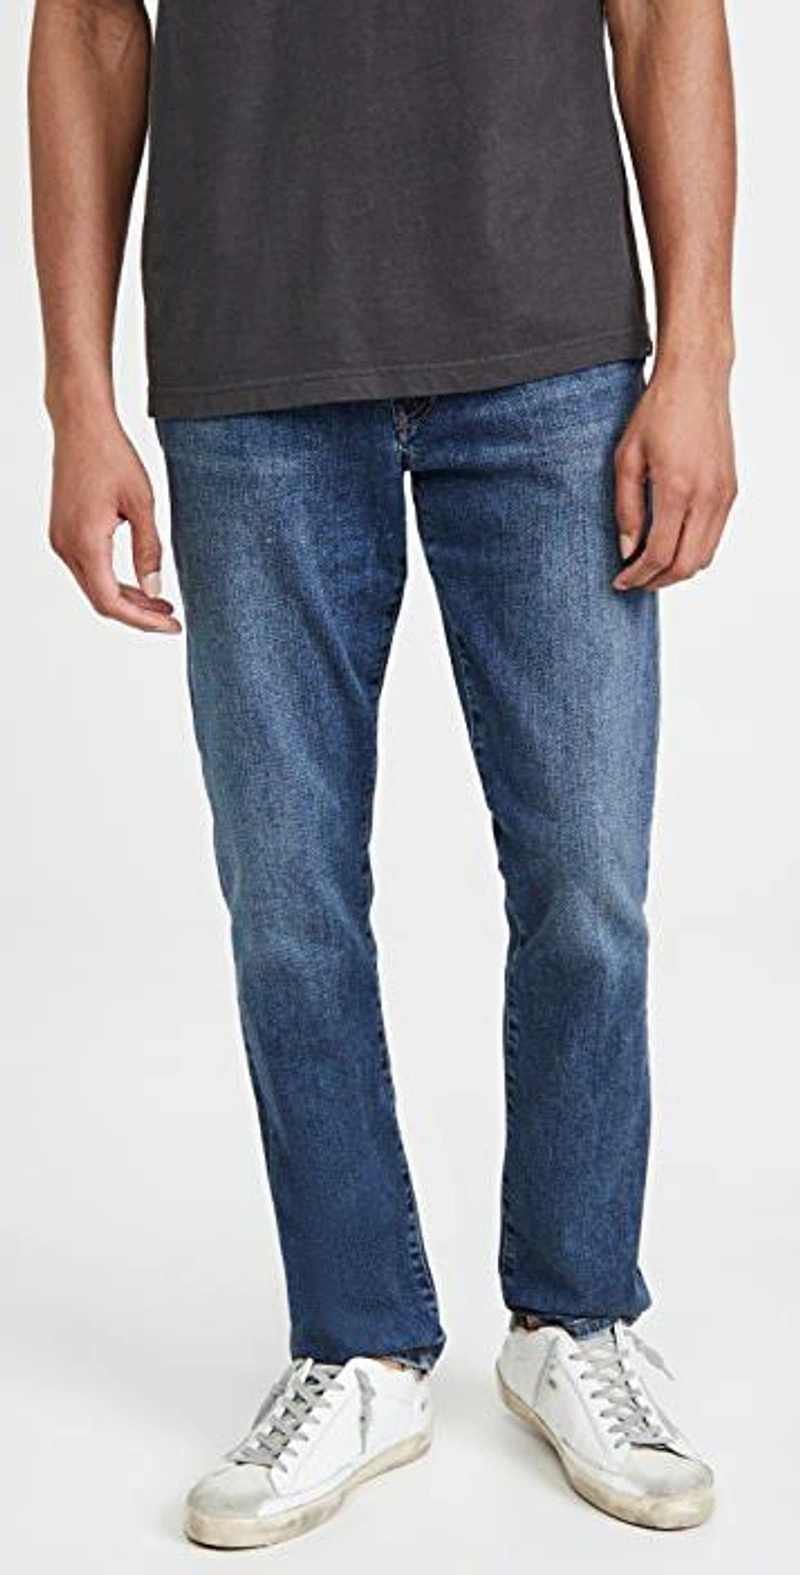 shopbop.com's Posts | 搭配: Citizens Of Humanity Gage Slim Straight Leg Jeans In Taylor